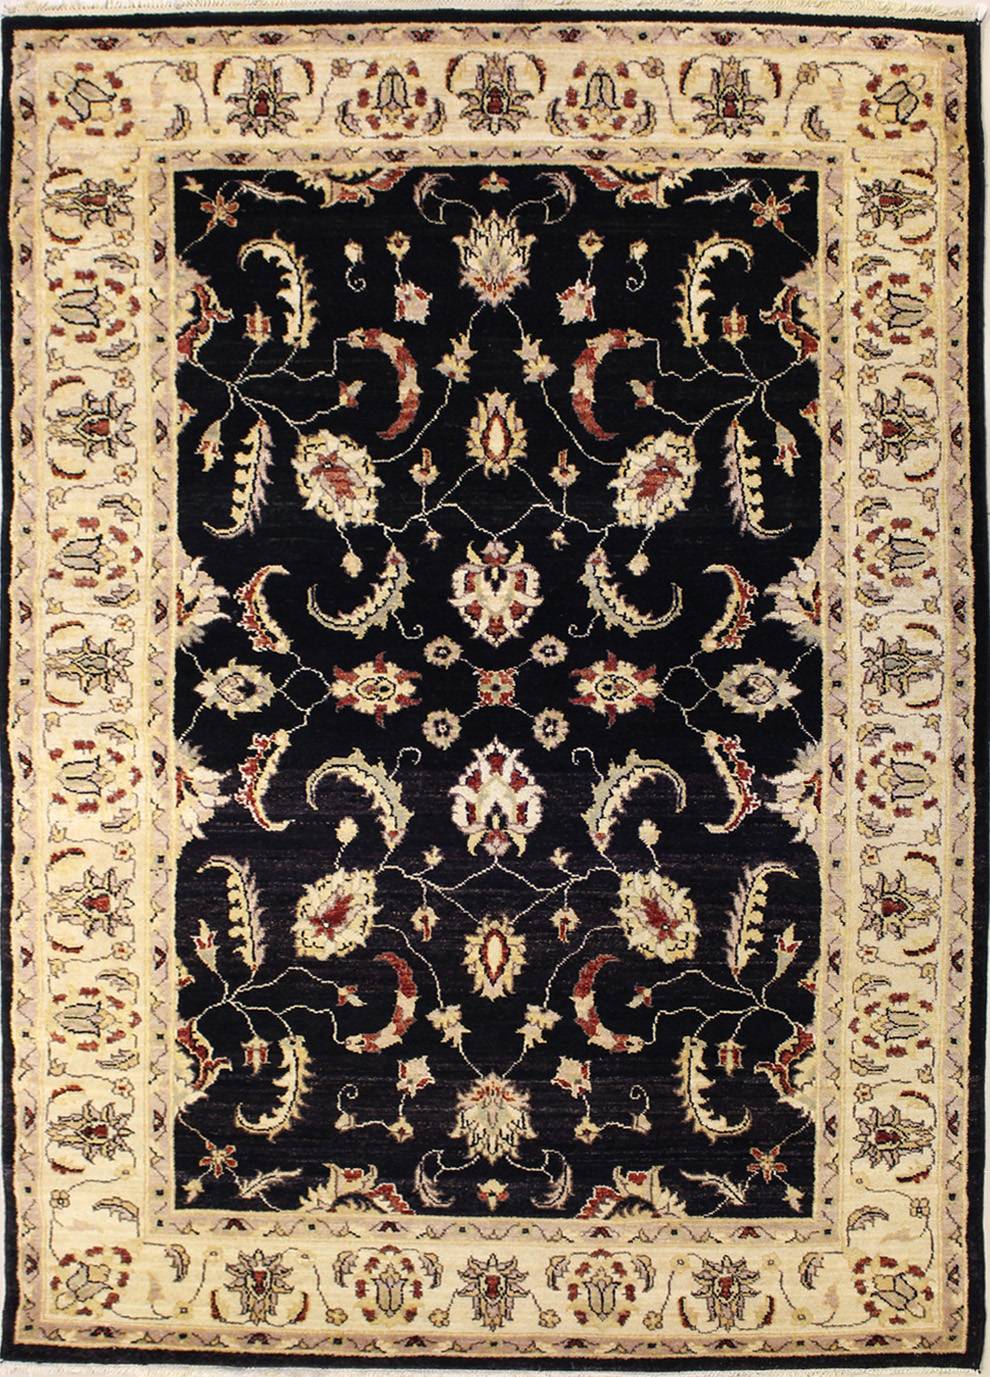 100% Original Hand-Knotted in Black,Beige,Green Colors RugsTC 6'1 x 8'7 Chobi Ziegler Area Rug Made Using Vegetable Dyes with Wool Pile a 6x9 Rectangular Double Knot Rug 